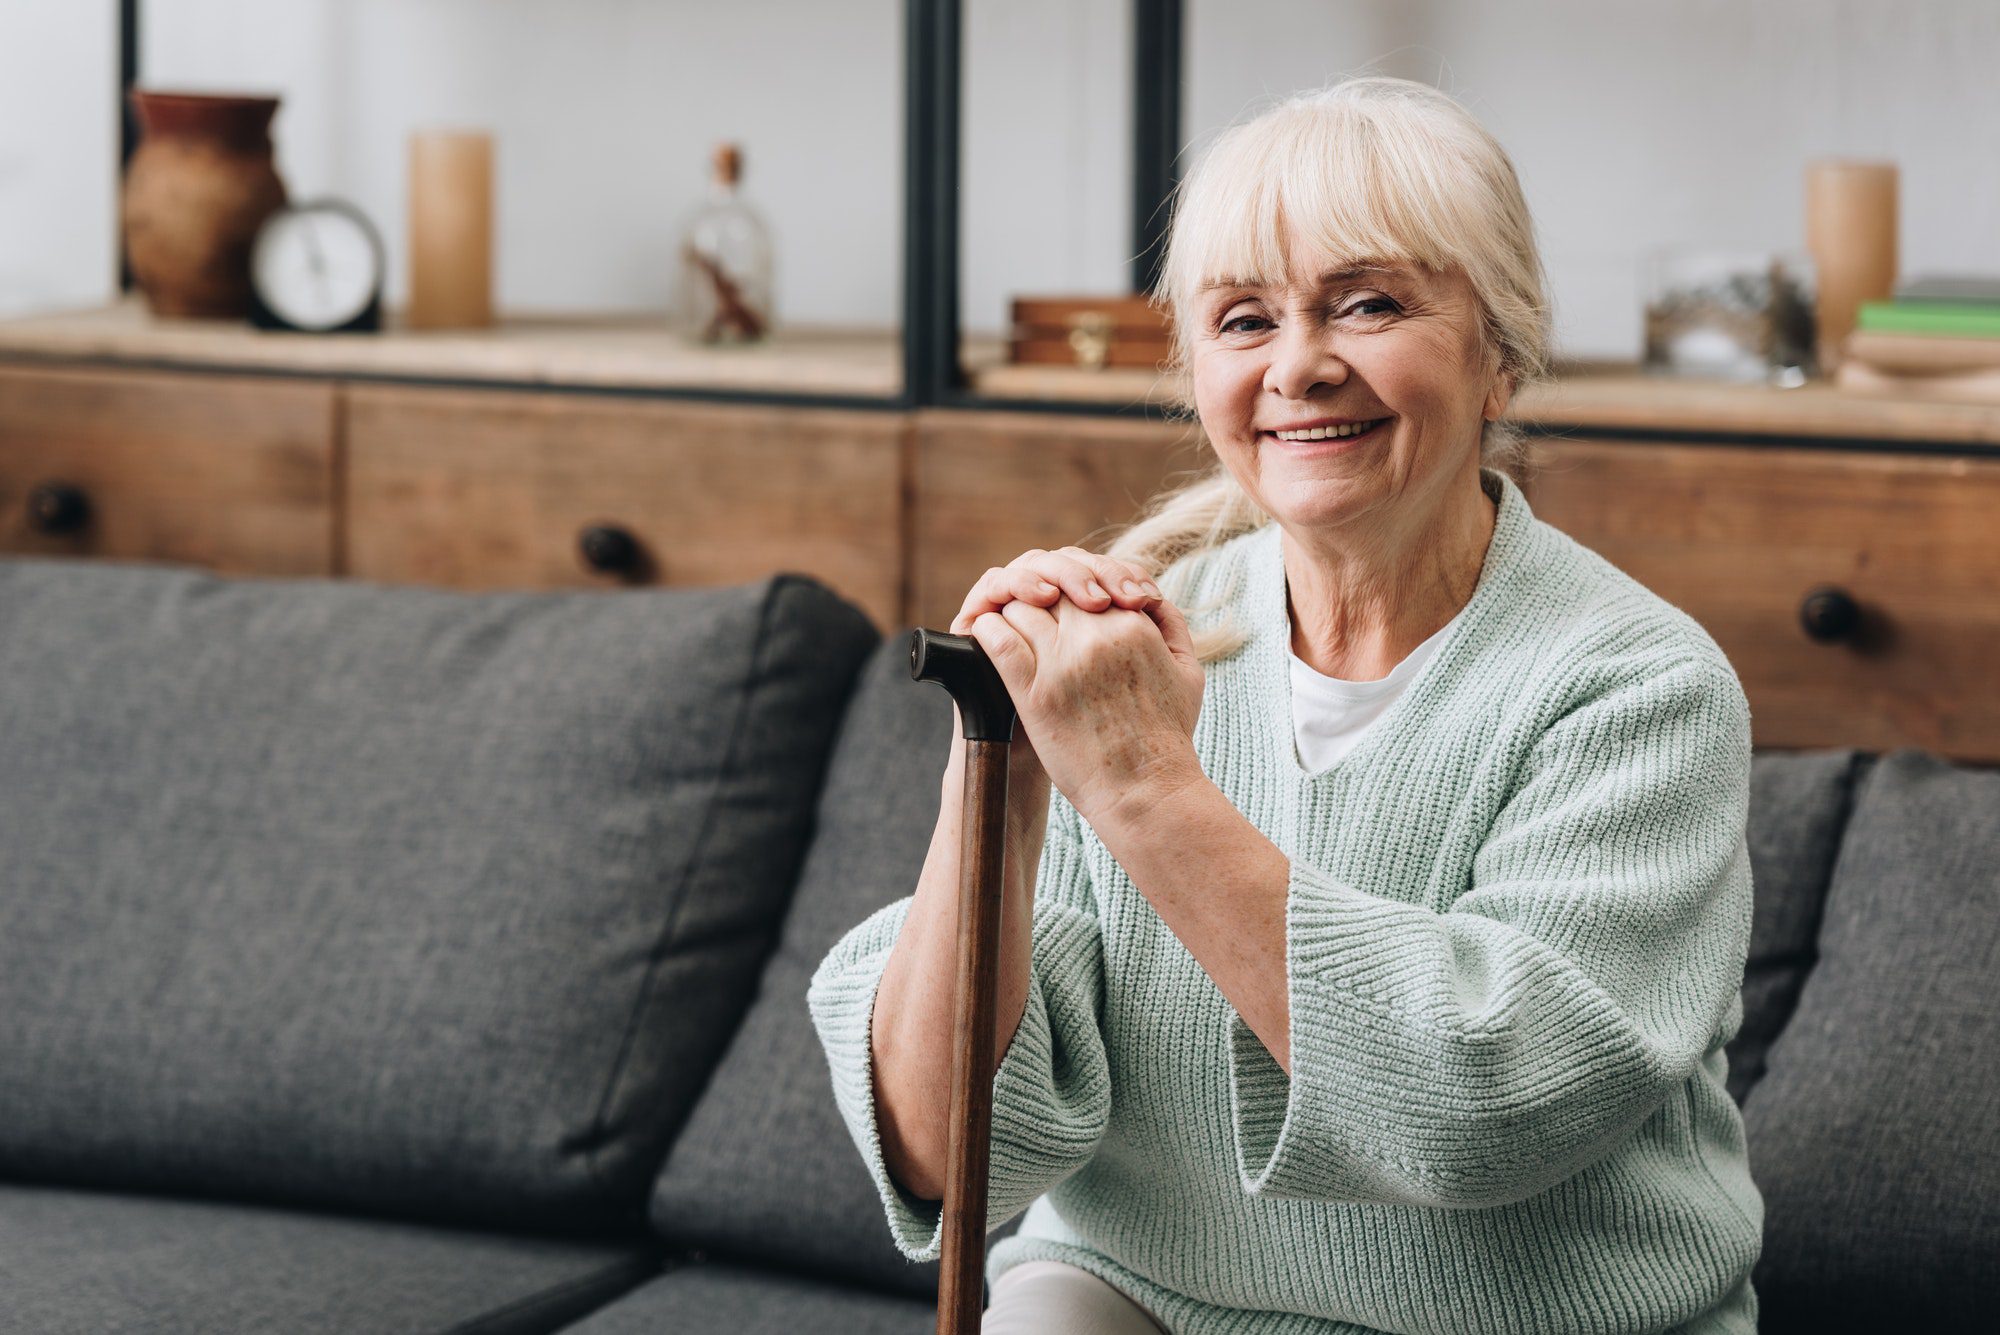 Cheerful senior woman sitting on sofa and holding walking stick on a Medicare Advantage Special Needs Plan.